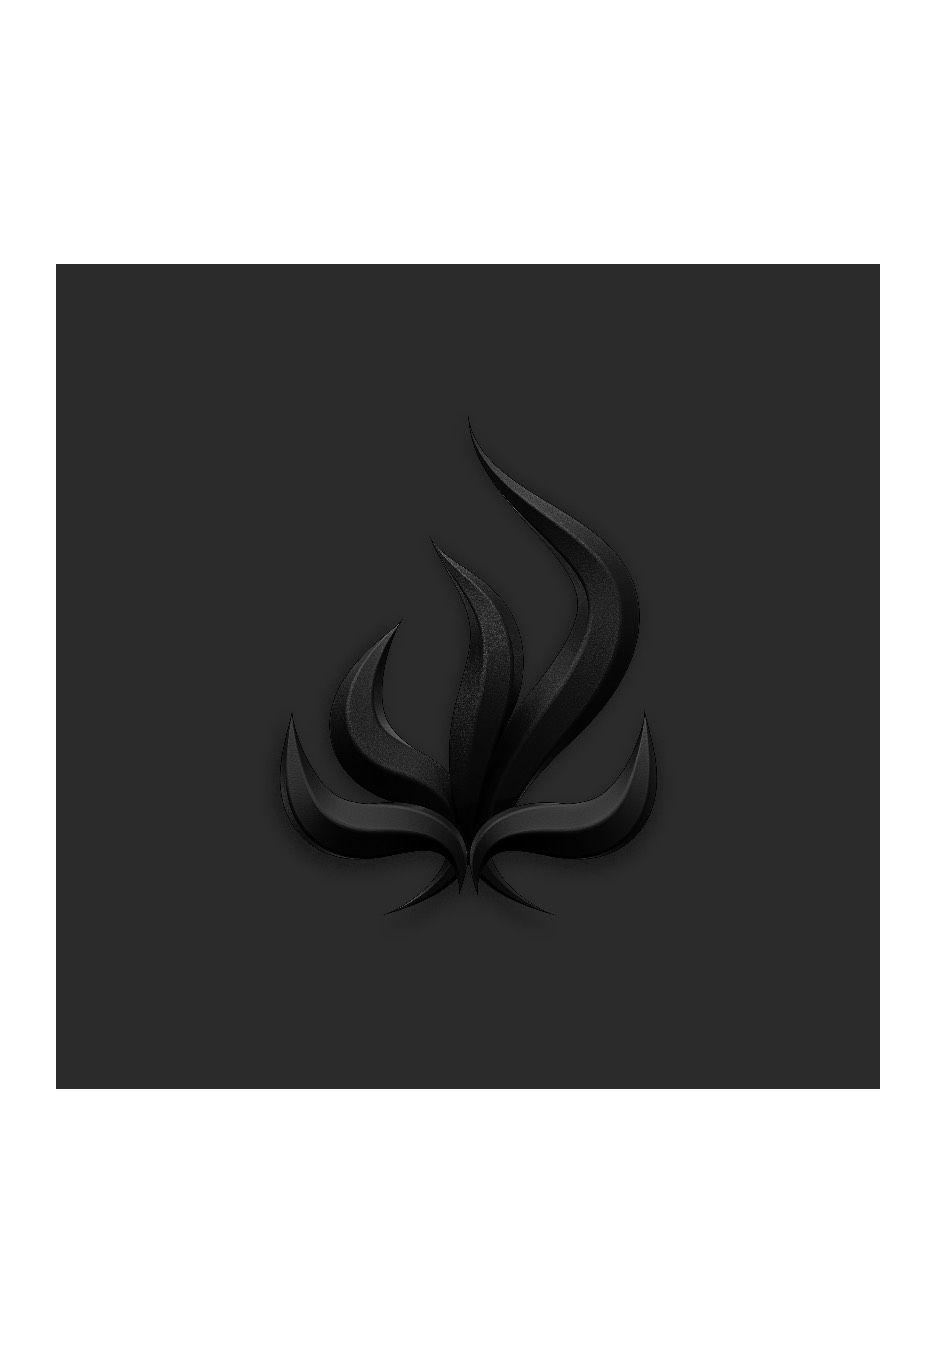 Black Flame Logo - Bury Tomorrow Flame, Vinyl and DVDs of your